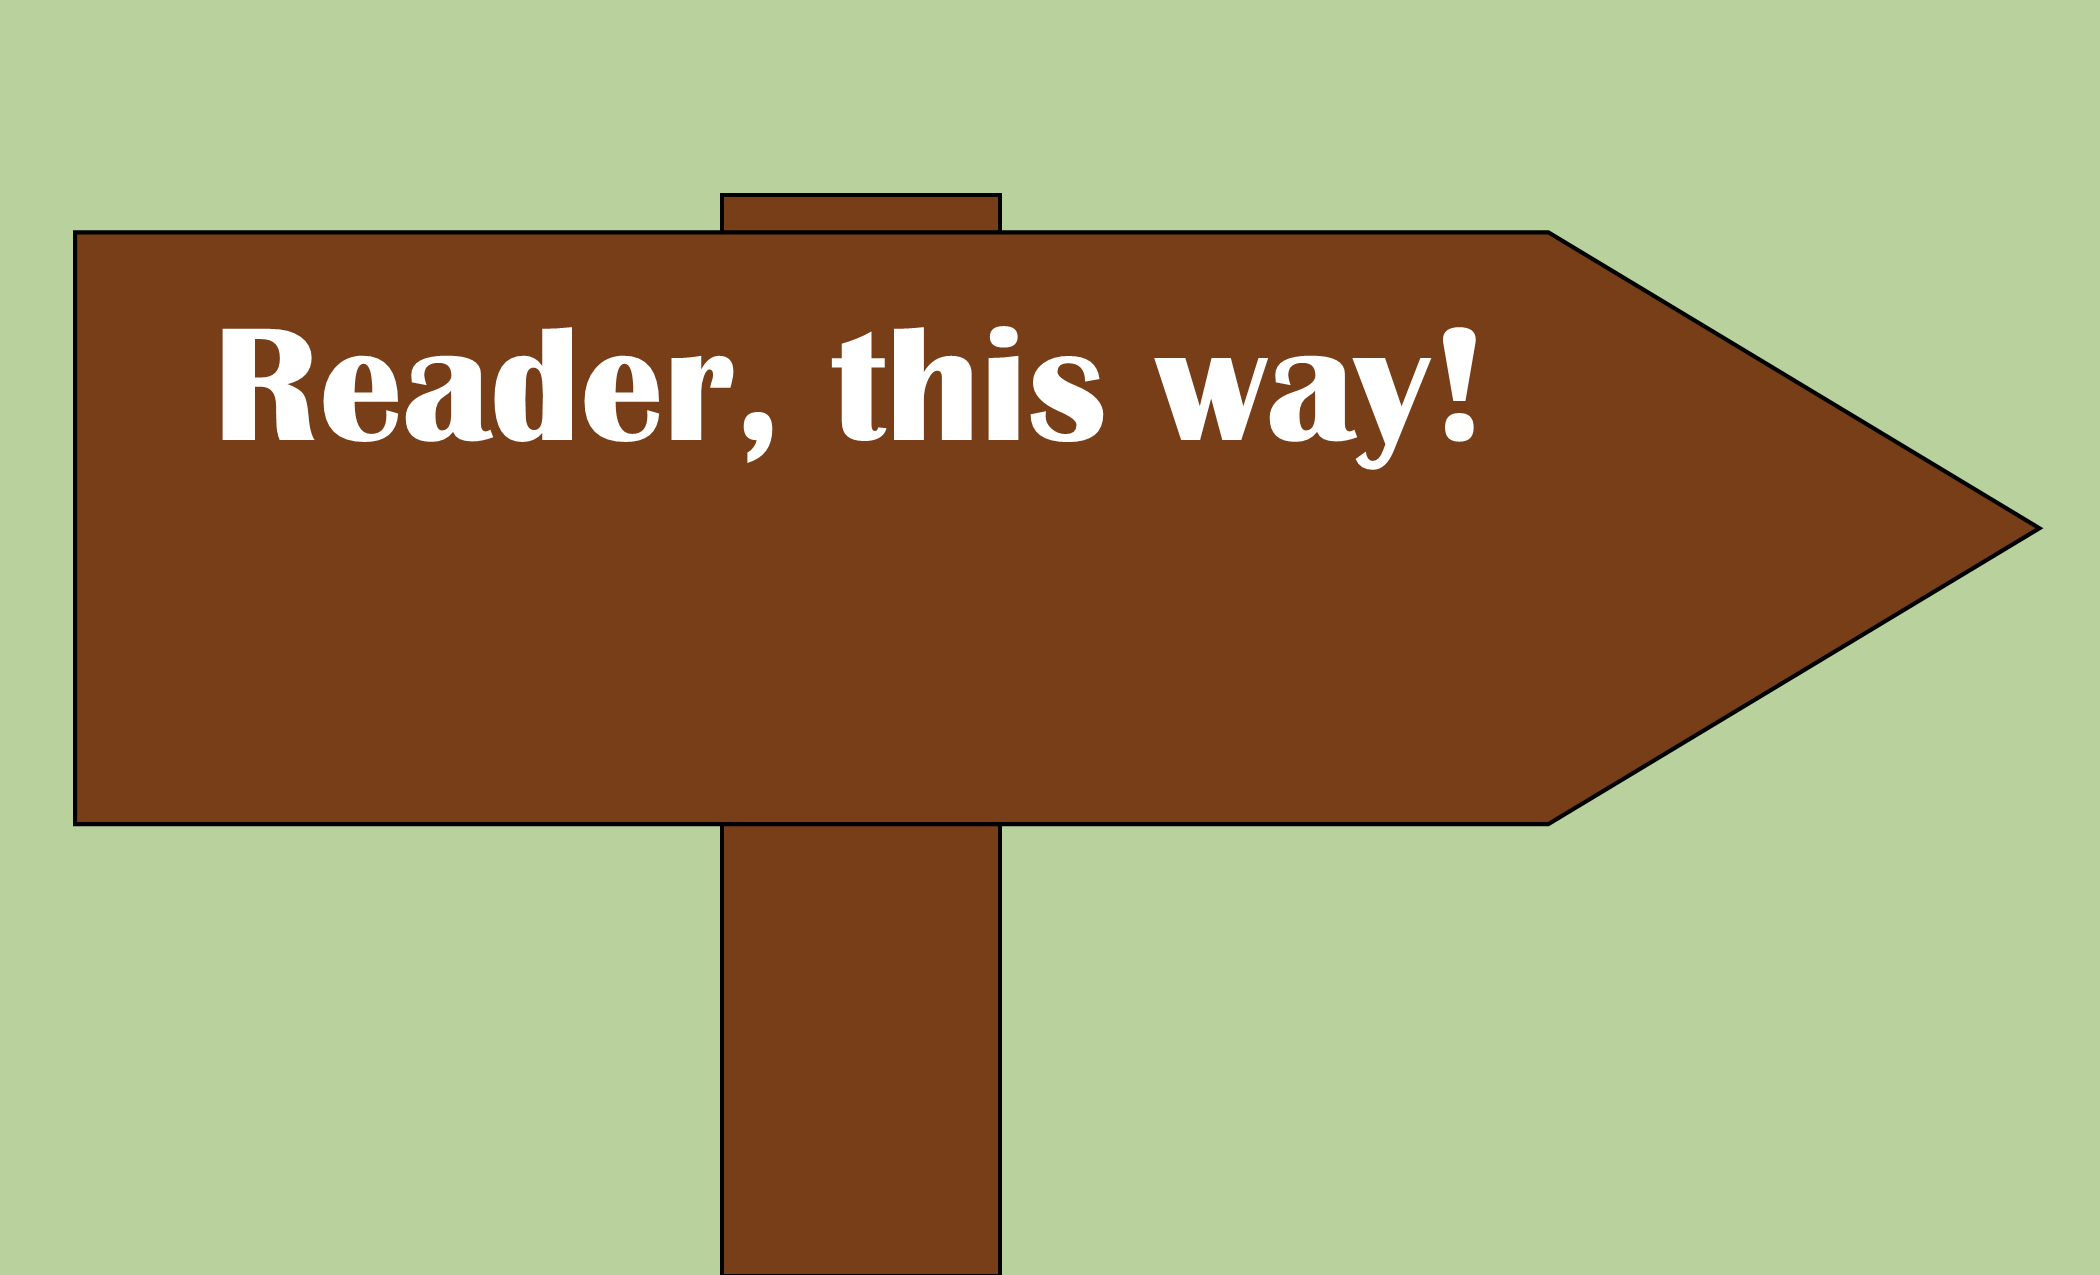 A brown cartoon signpost pointing to one side, bearing the text, "Reader, this way!"